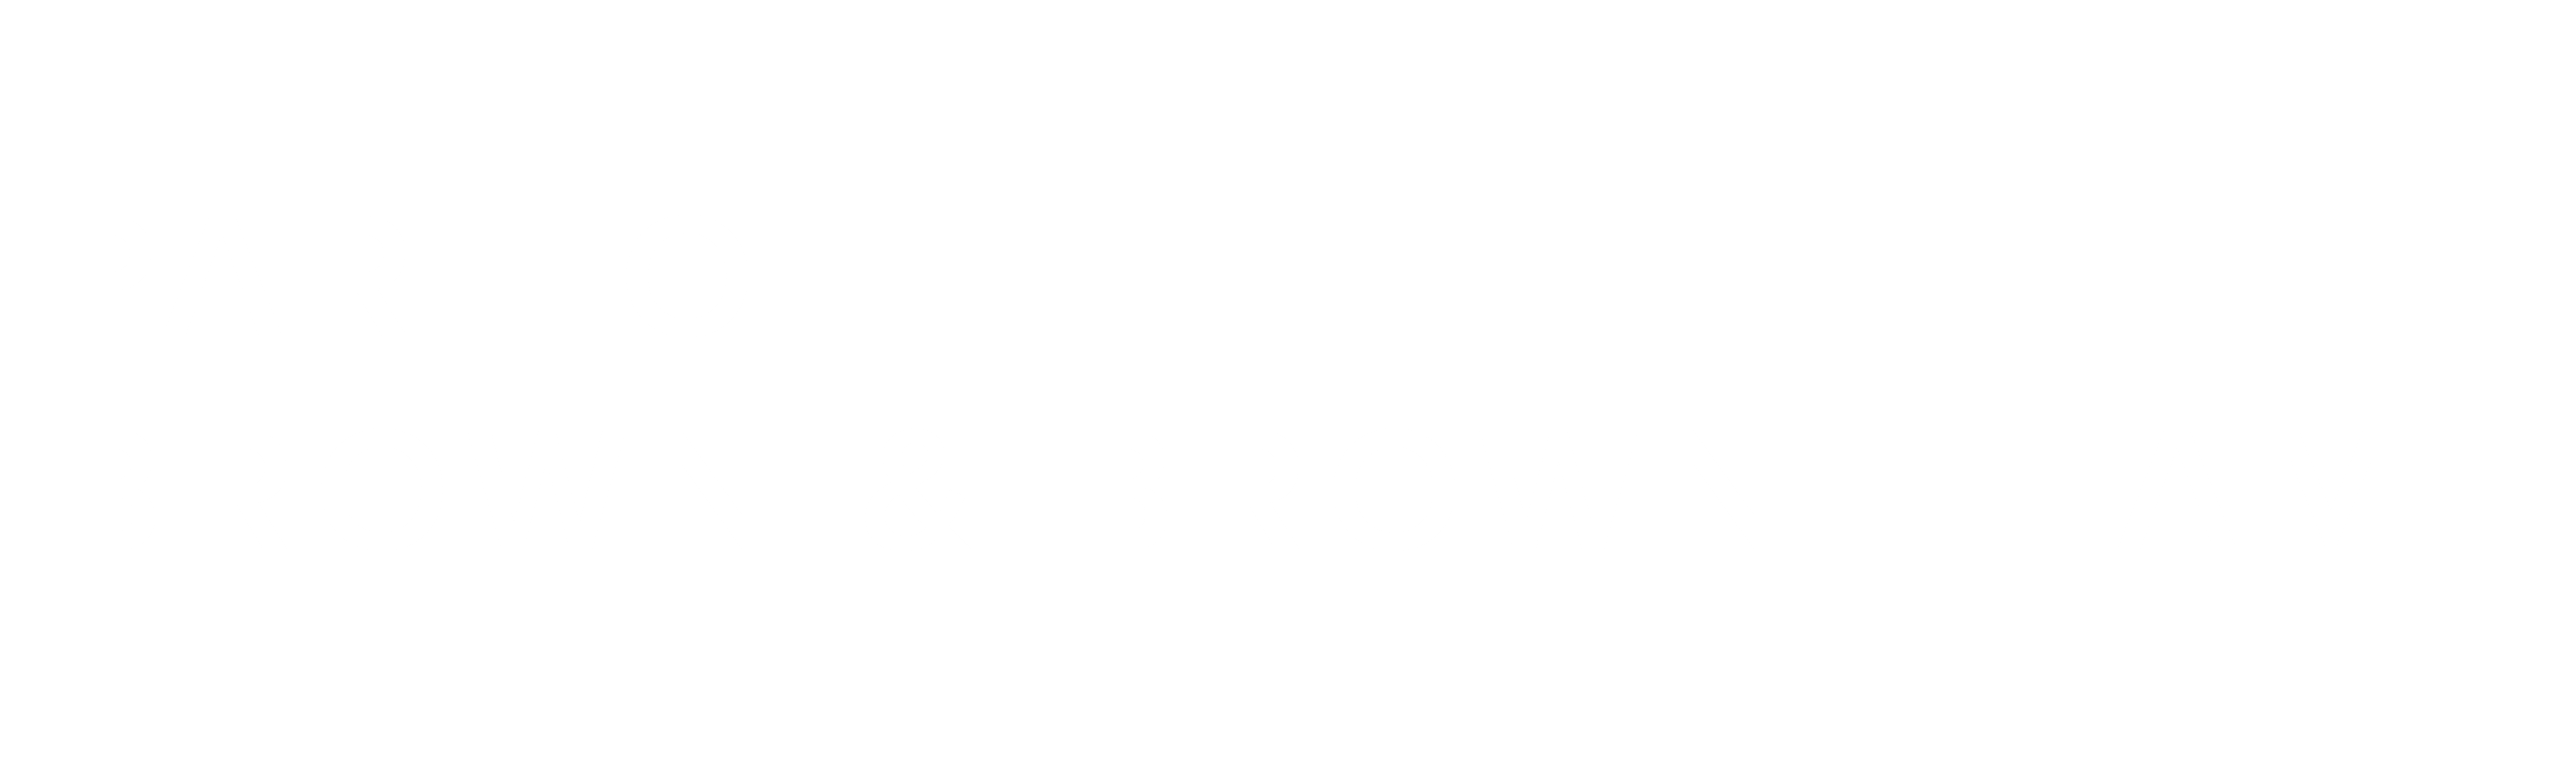 brown and brow Europe logo